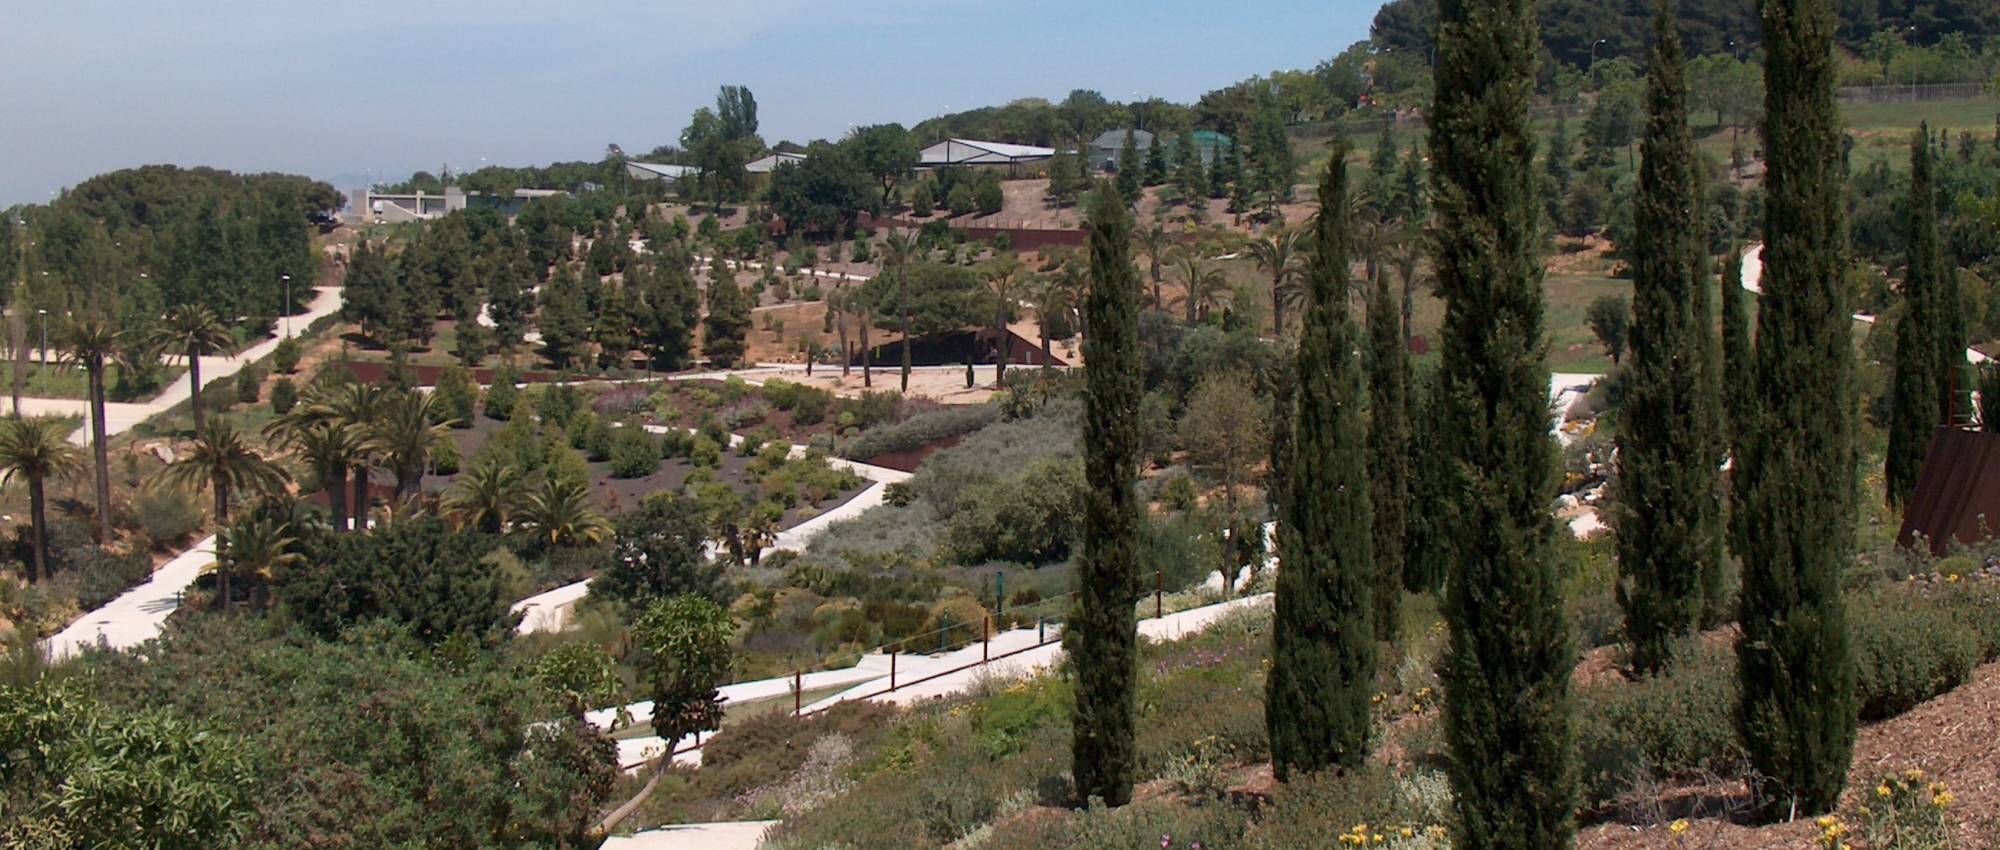 The Botanical Gardens Of Barcelona Cultural Heritage Goverment